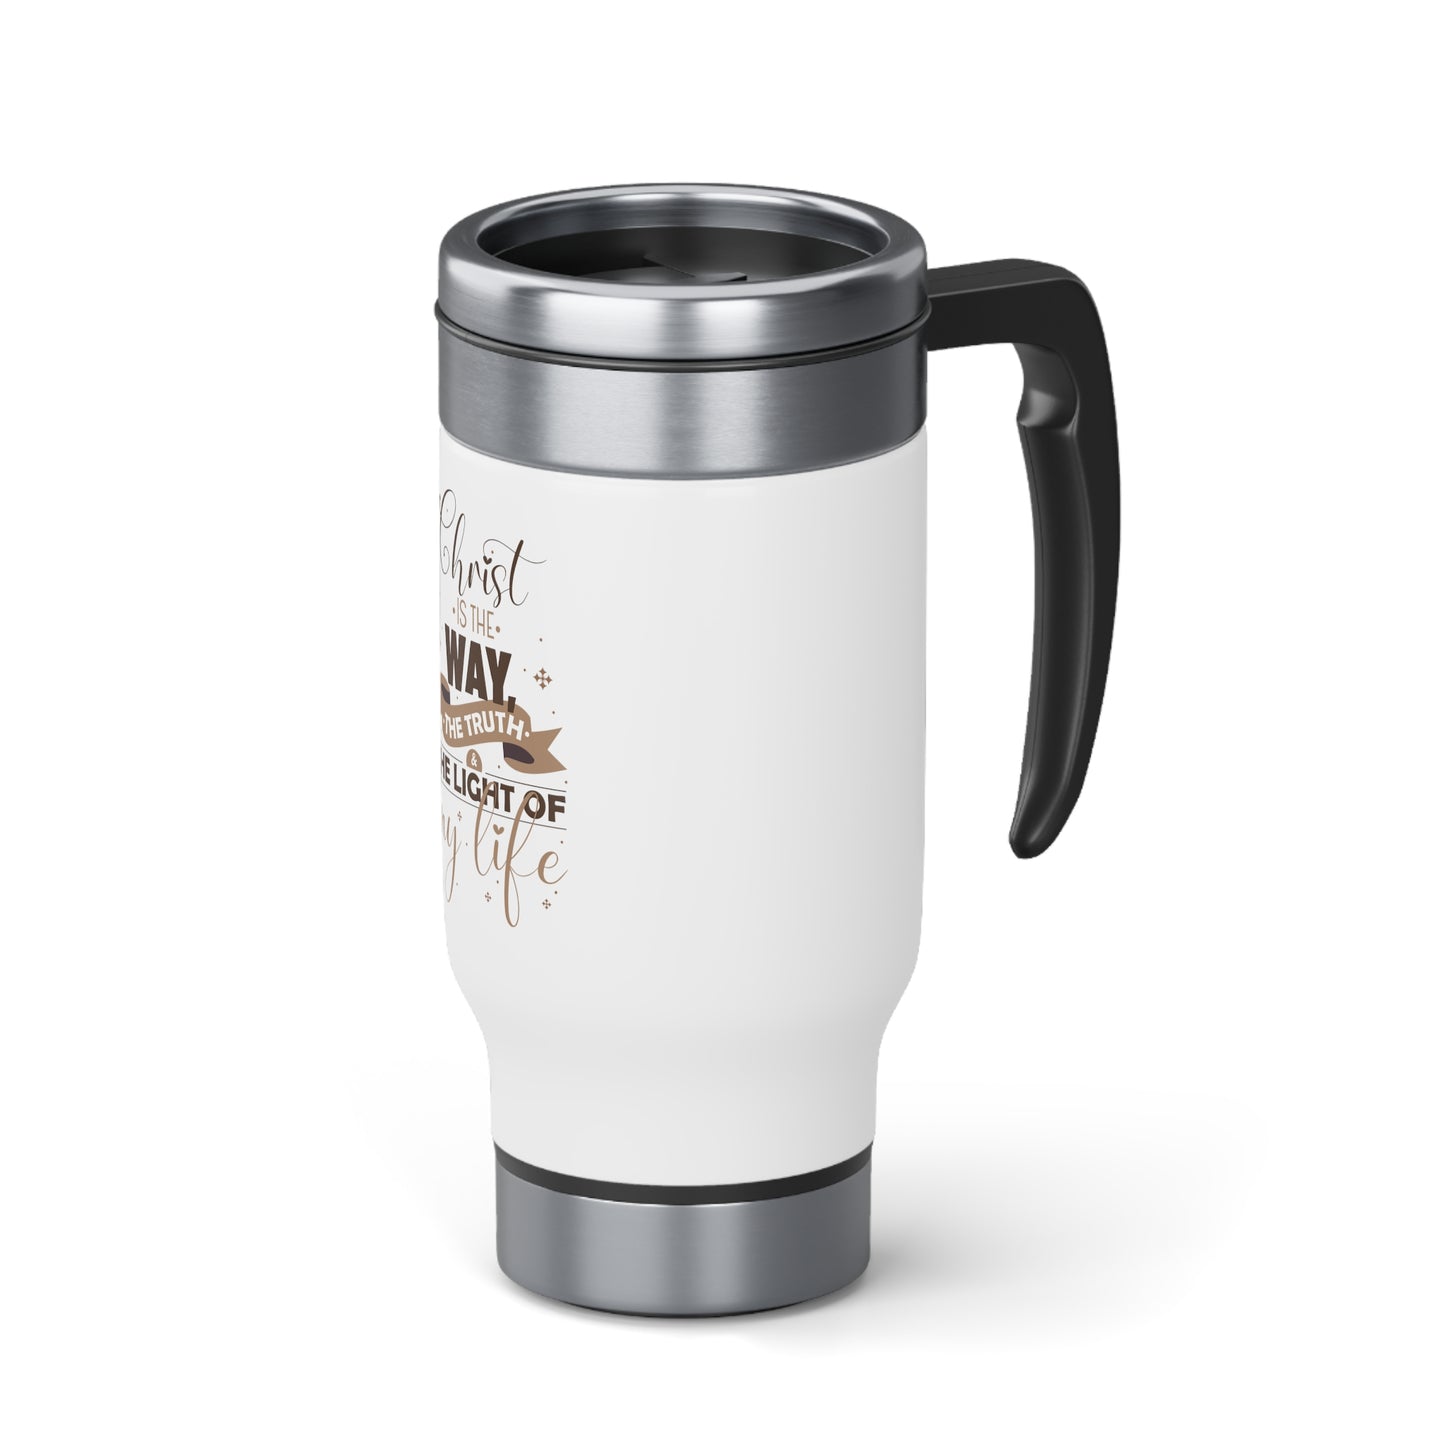 Christ Is The Way, The Truth & The Light Of My Life Travel Mug with Handle, 14oz